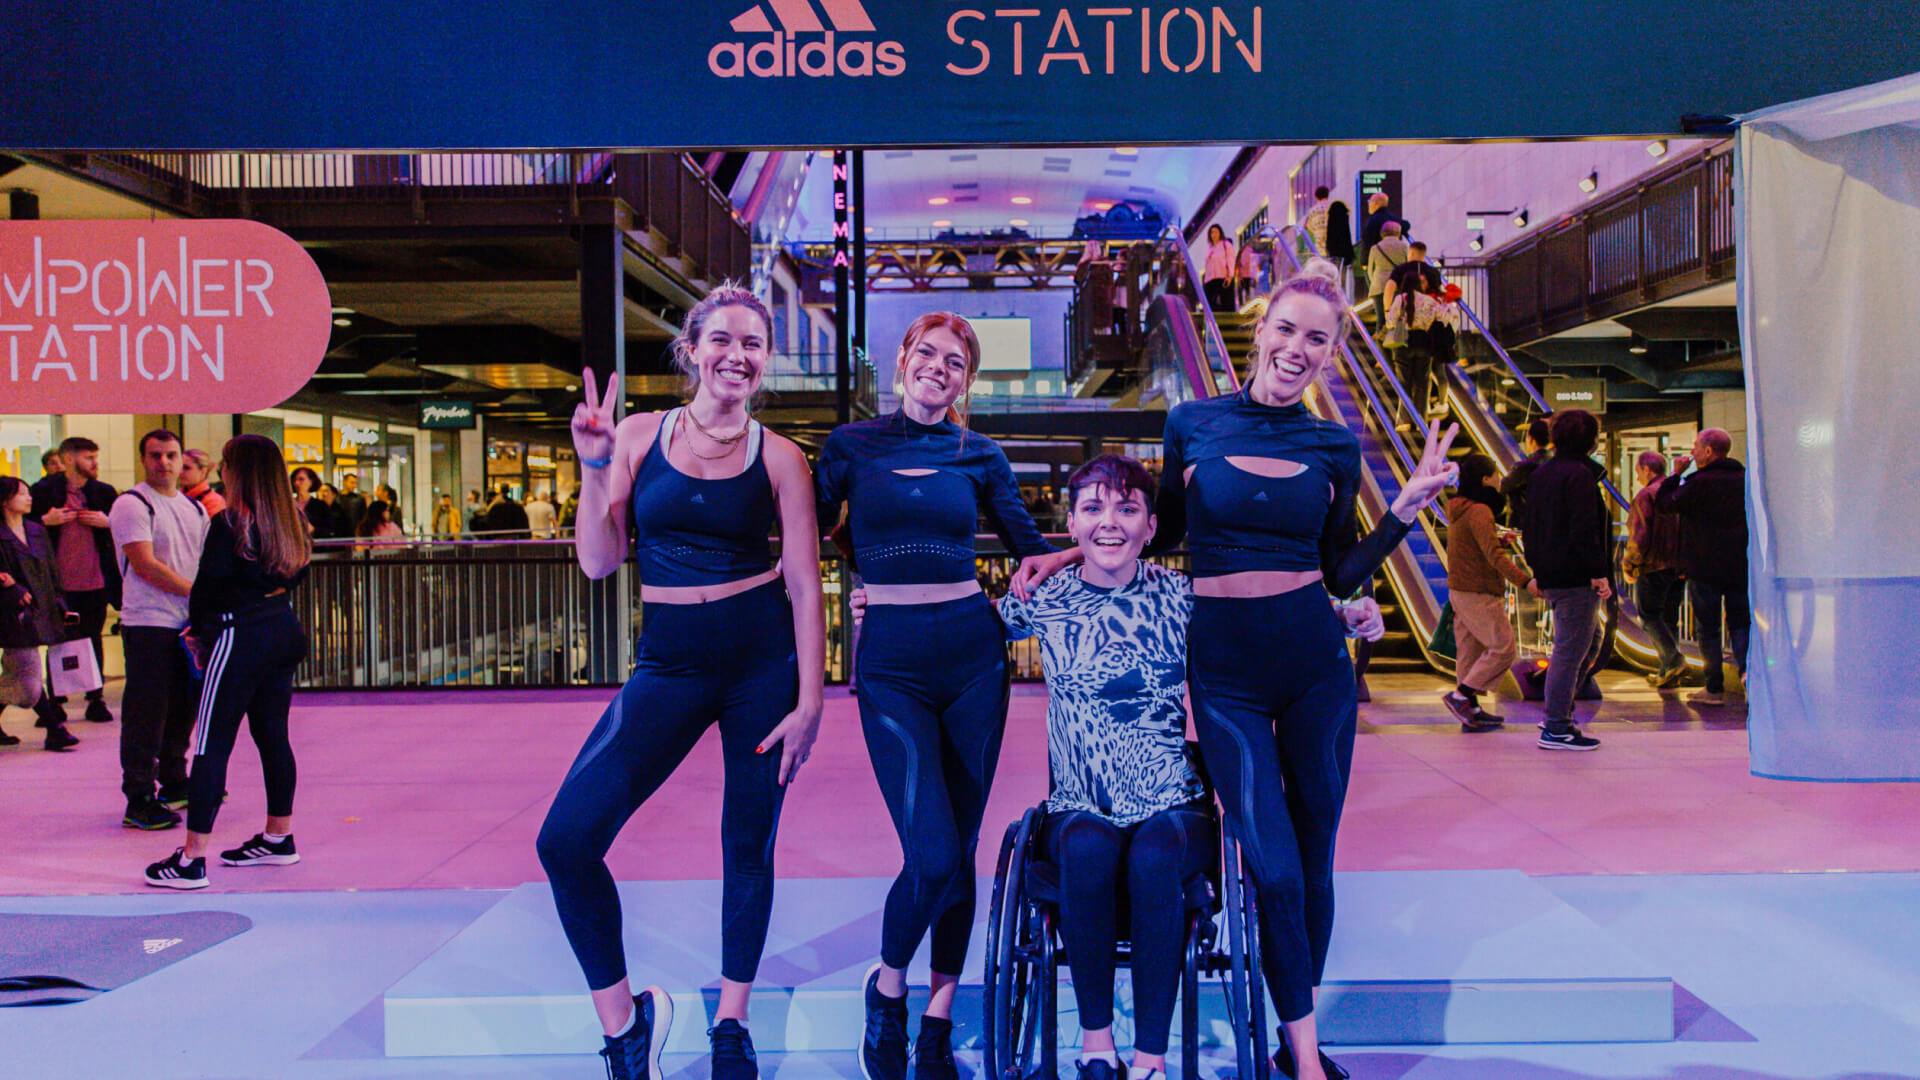 Adidas Empower Station with people